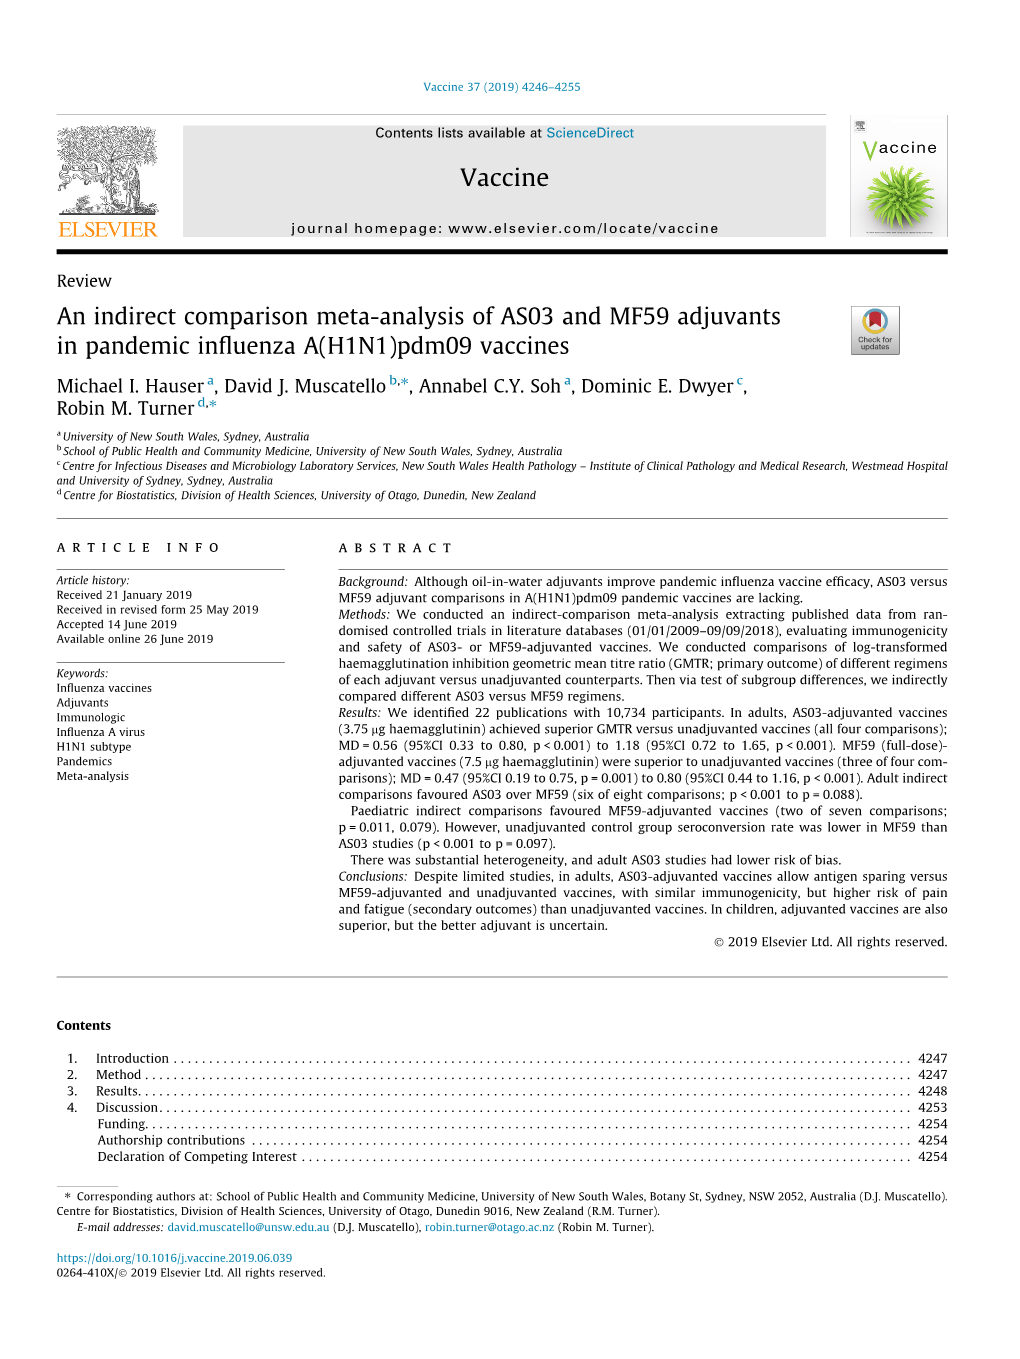 An Indirect Comparison Meta-Analysis of AS03 and MF59 Adjuvants in Pandemic Inﬂuenza A(H1N1)Pdm09 Vaccines ⇑ Michael I